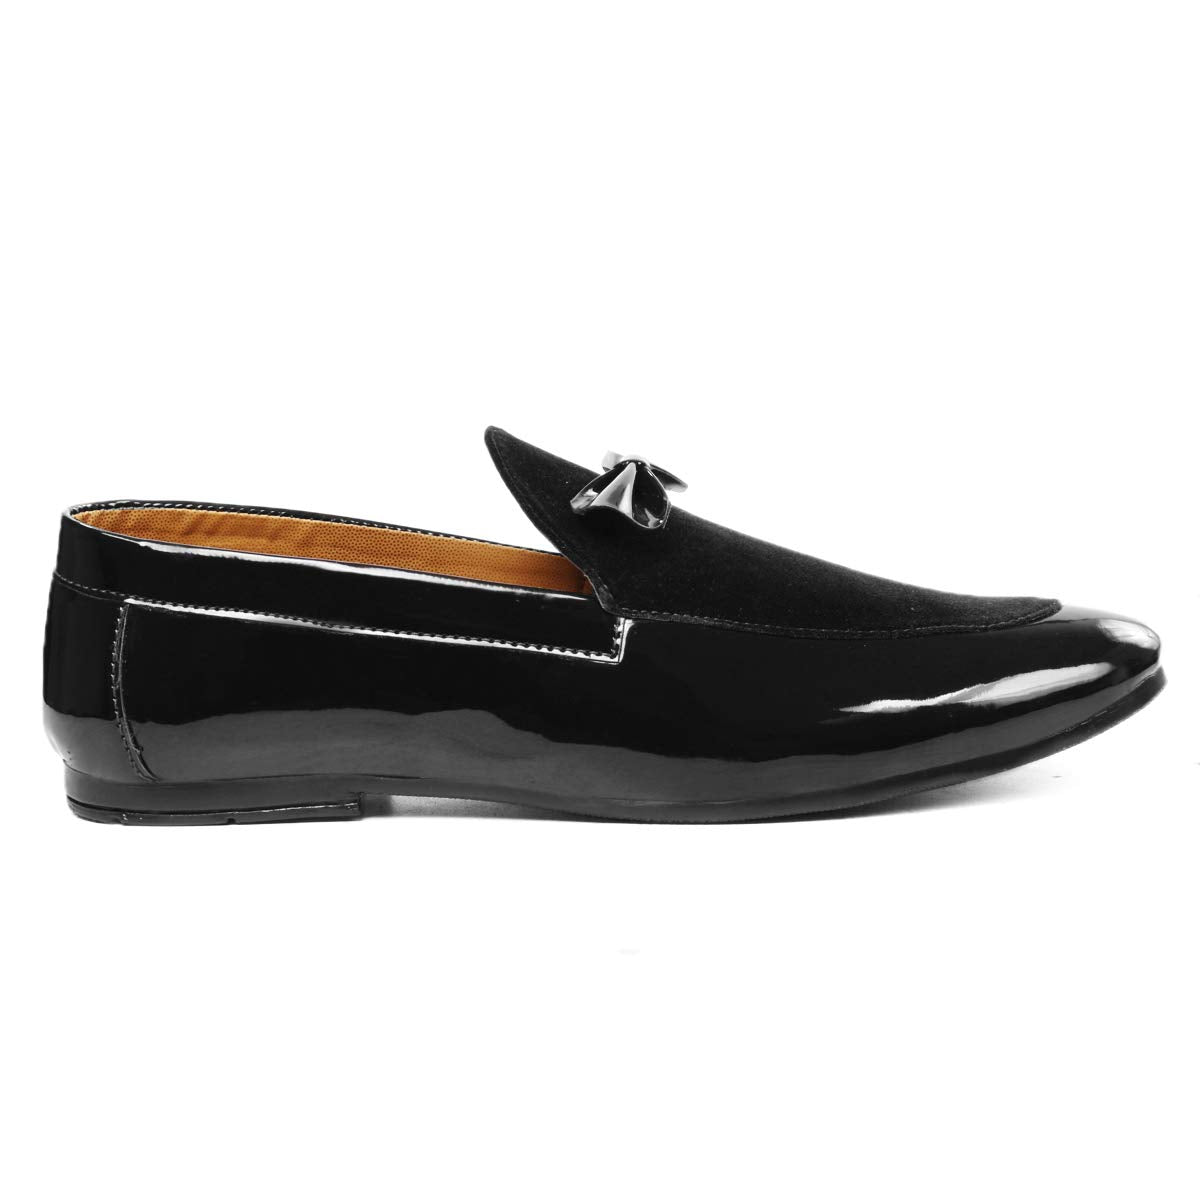 Classic Design Wedding And Party Wear Loafer & Moccasins Shoes For Men's-Unique and Classy